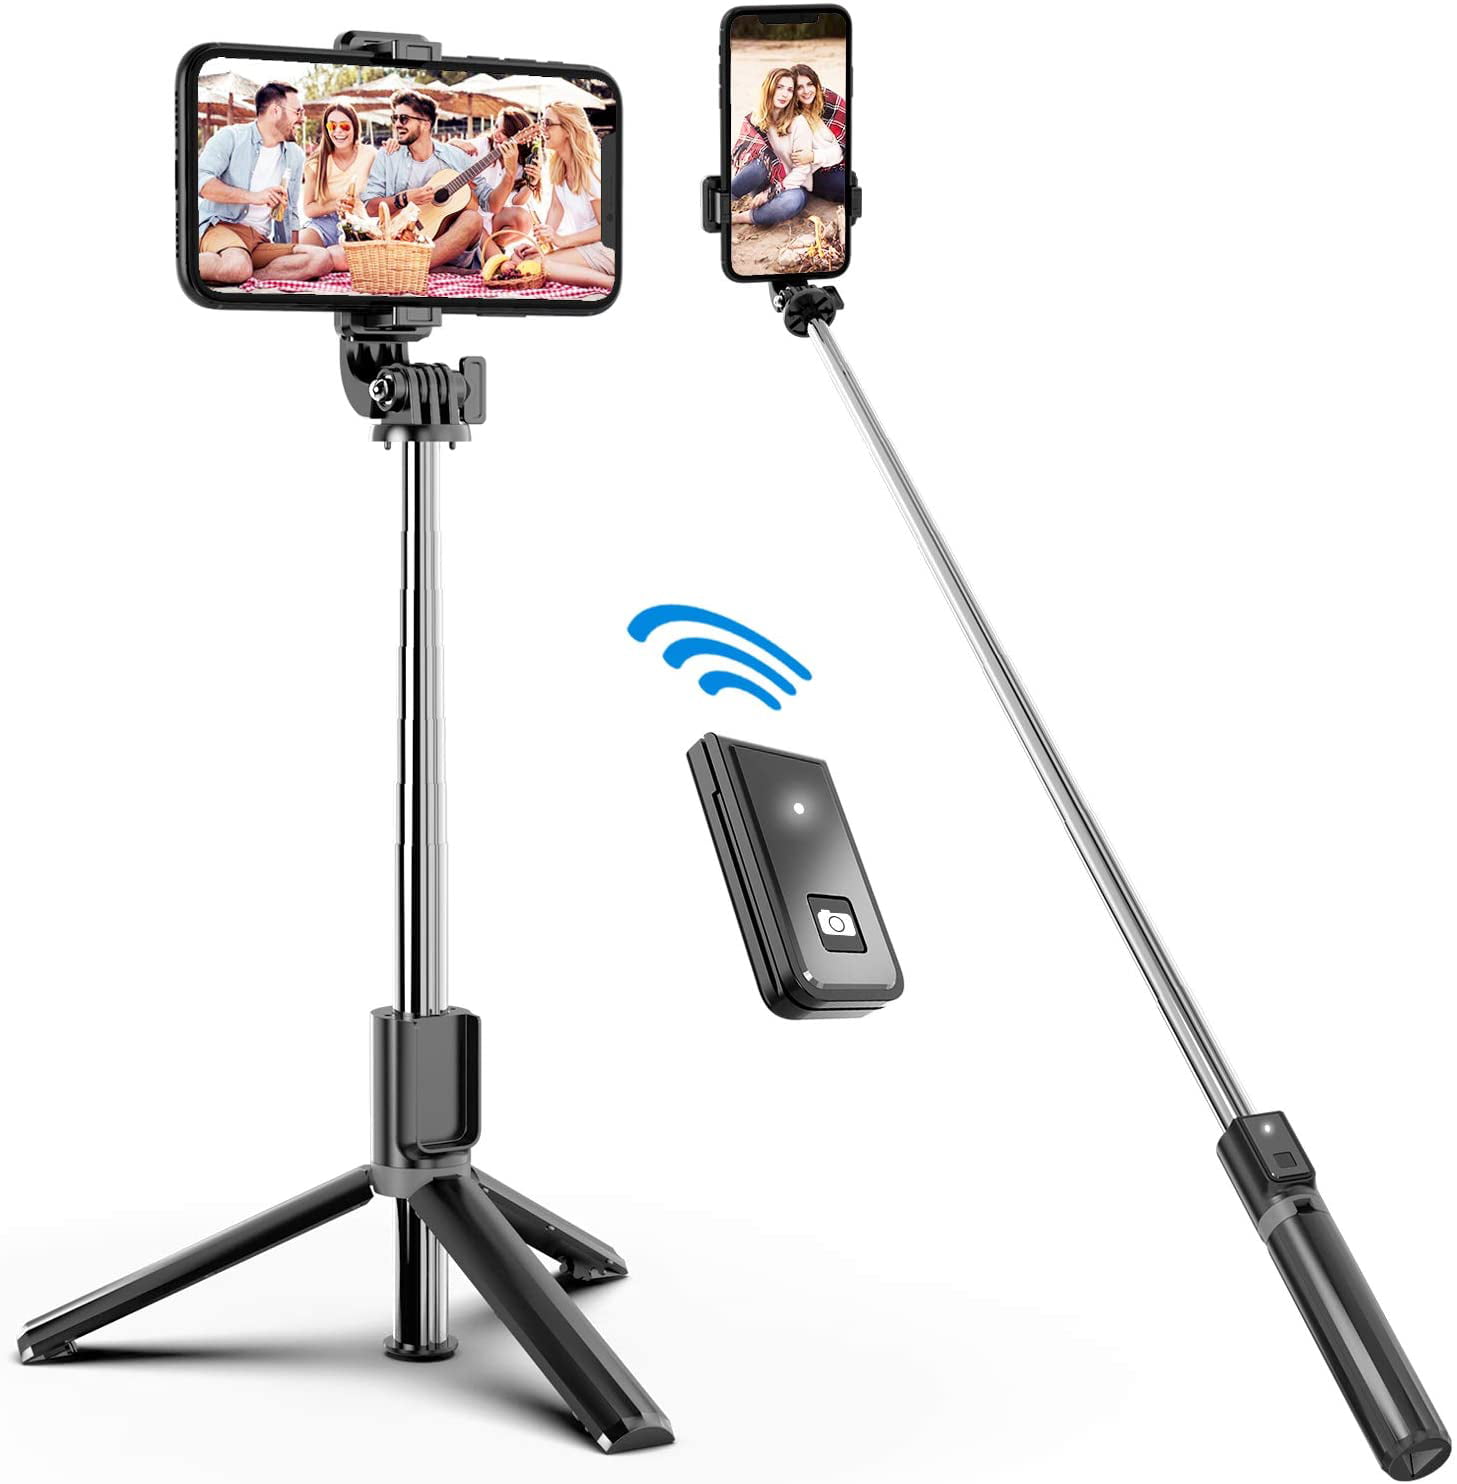 White Sony Extendable Portable Bluetooth Selfie Stick with Wireless Remote for iPhone 13/12/12 Pro/11/11 Pro/XS/XR/X/8/7 Plus/6S Samsung 40 Selfie Stick Tripod LG Android Smartphones Google 